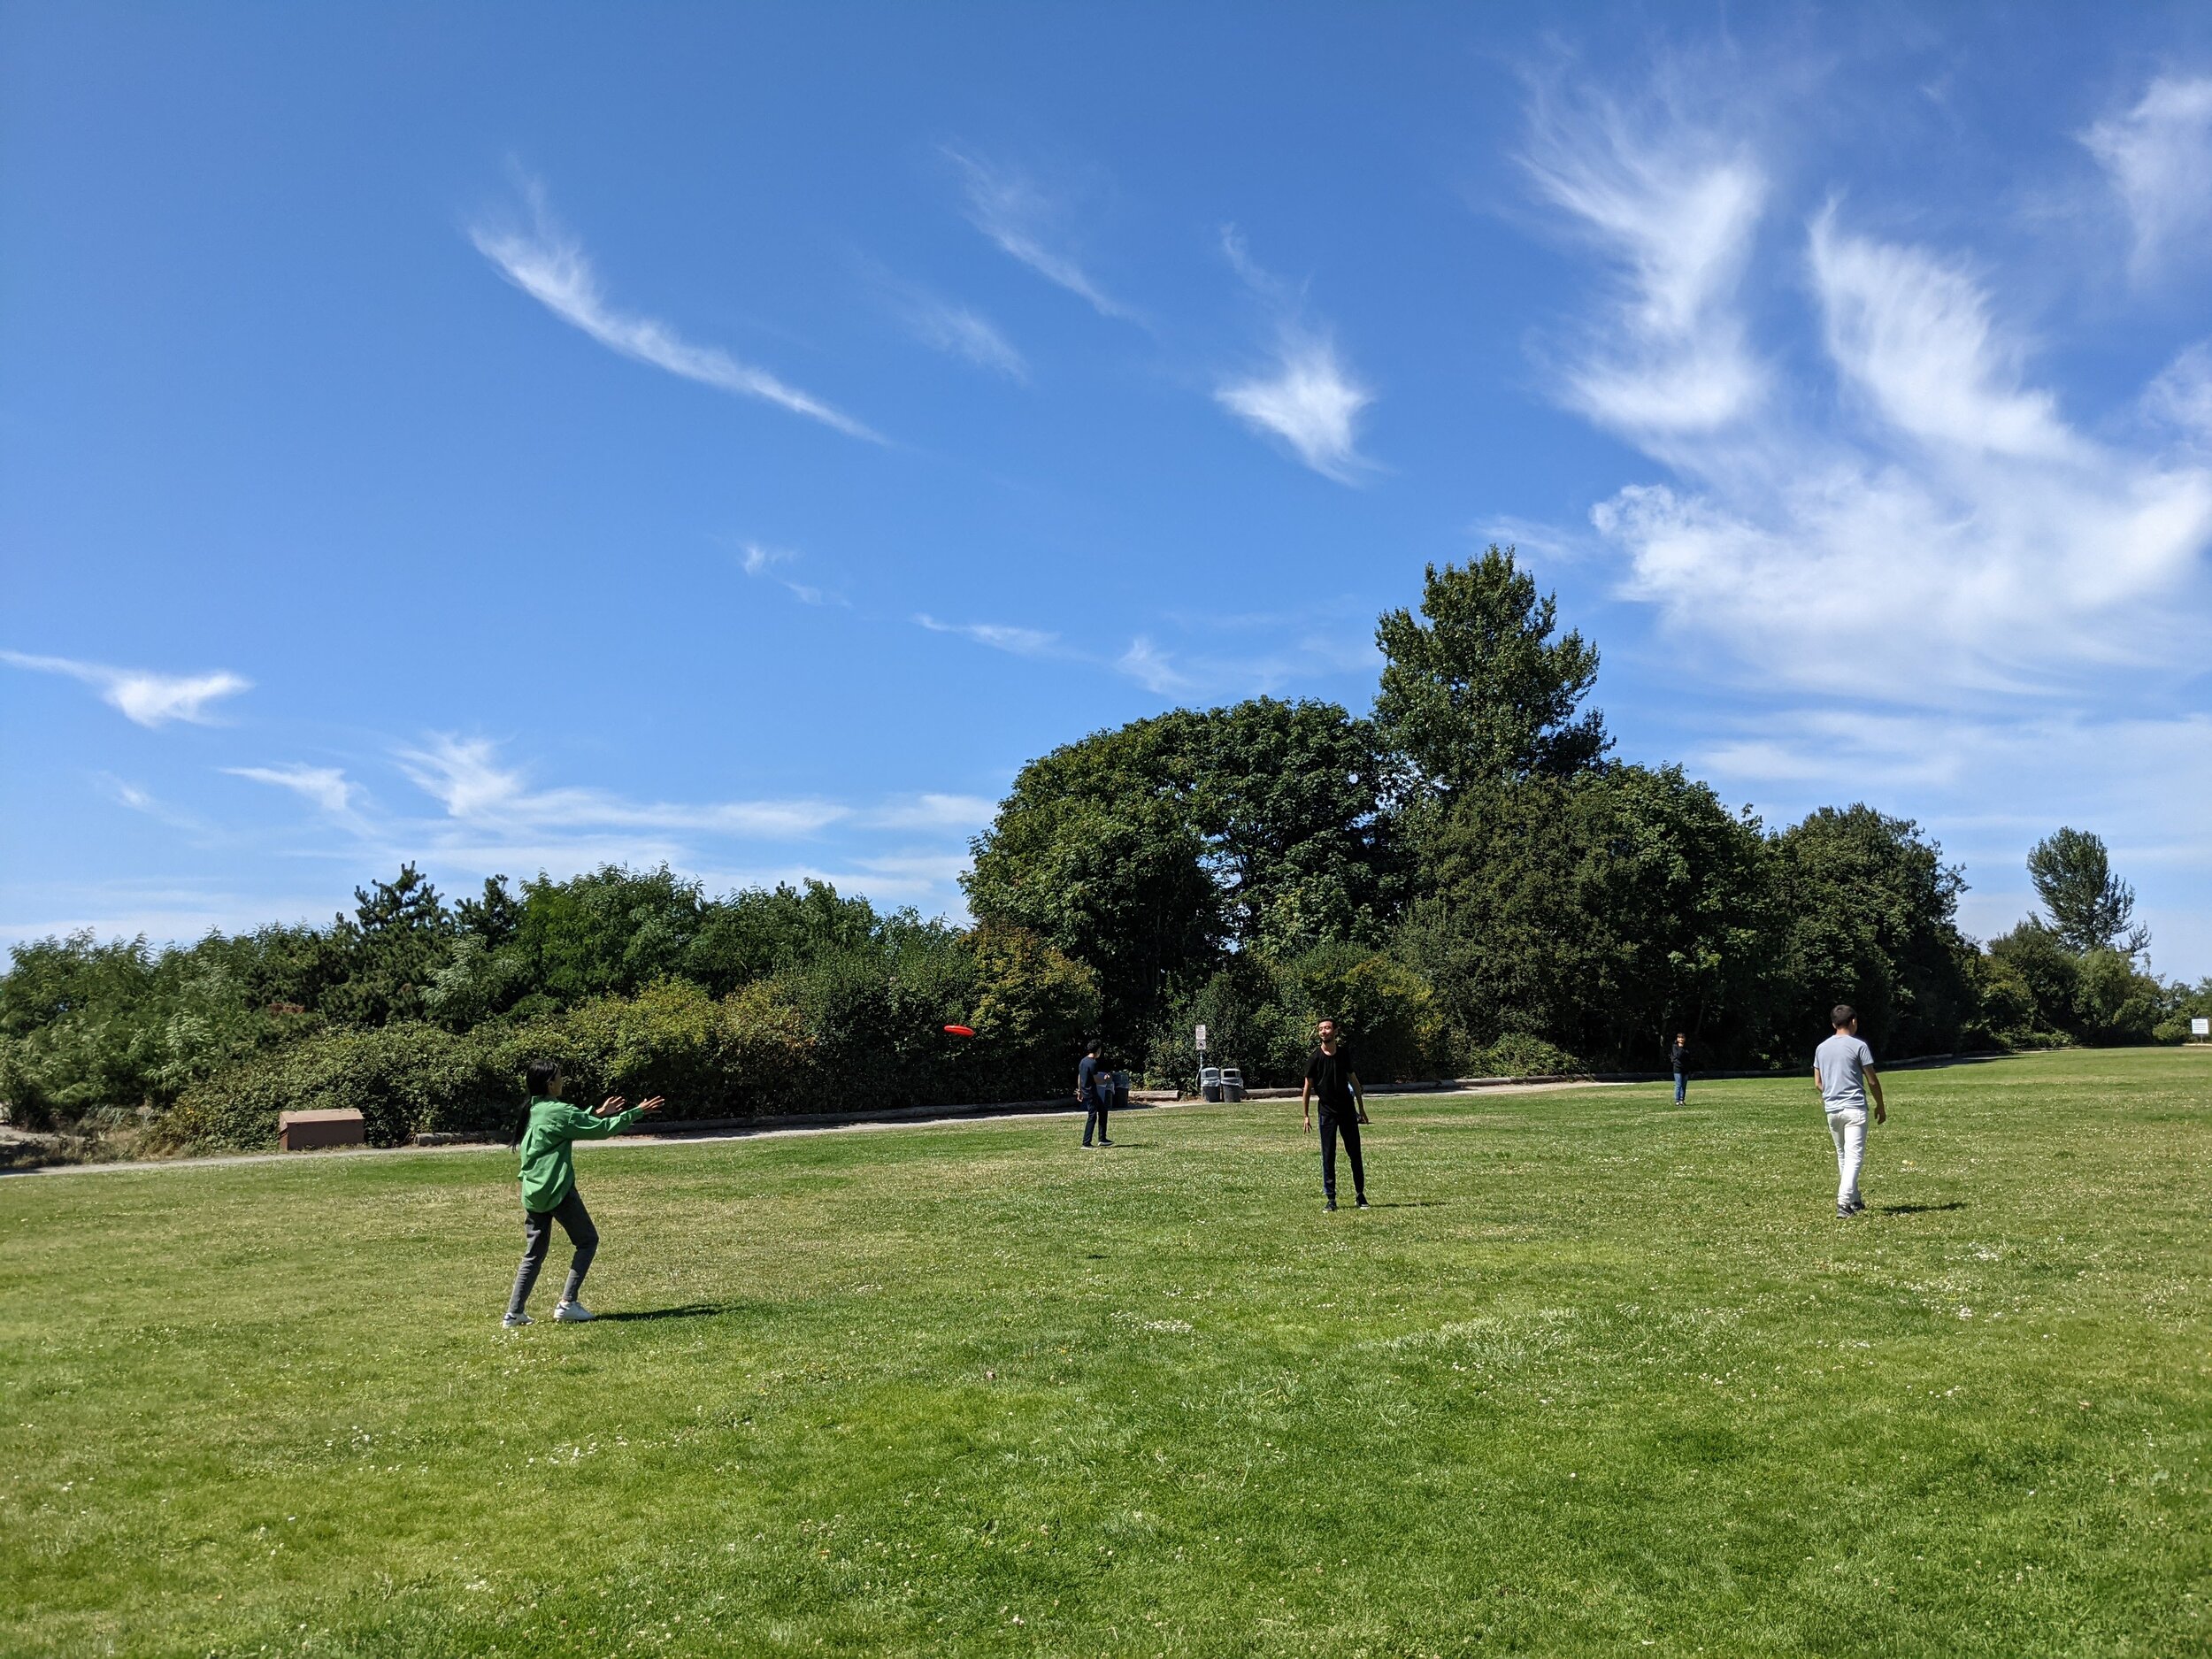 Learning to play frisbee and American football after a picnic lunch at the beach